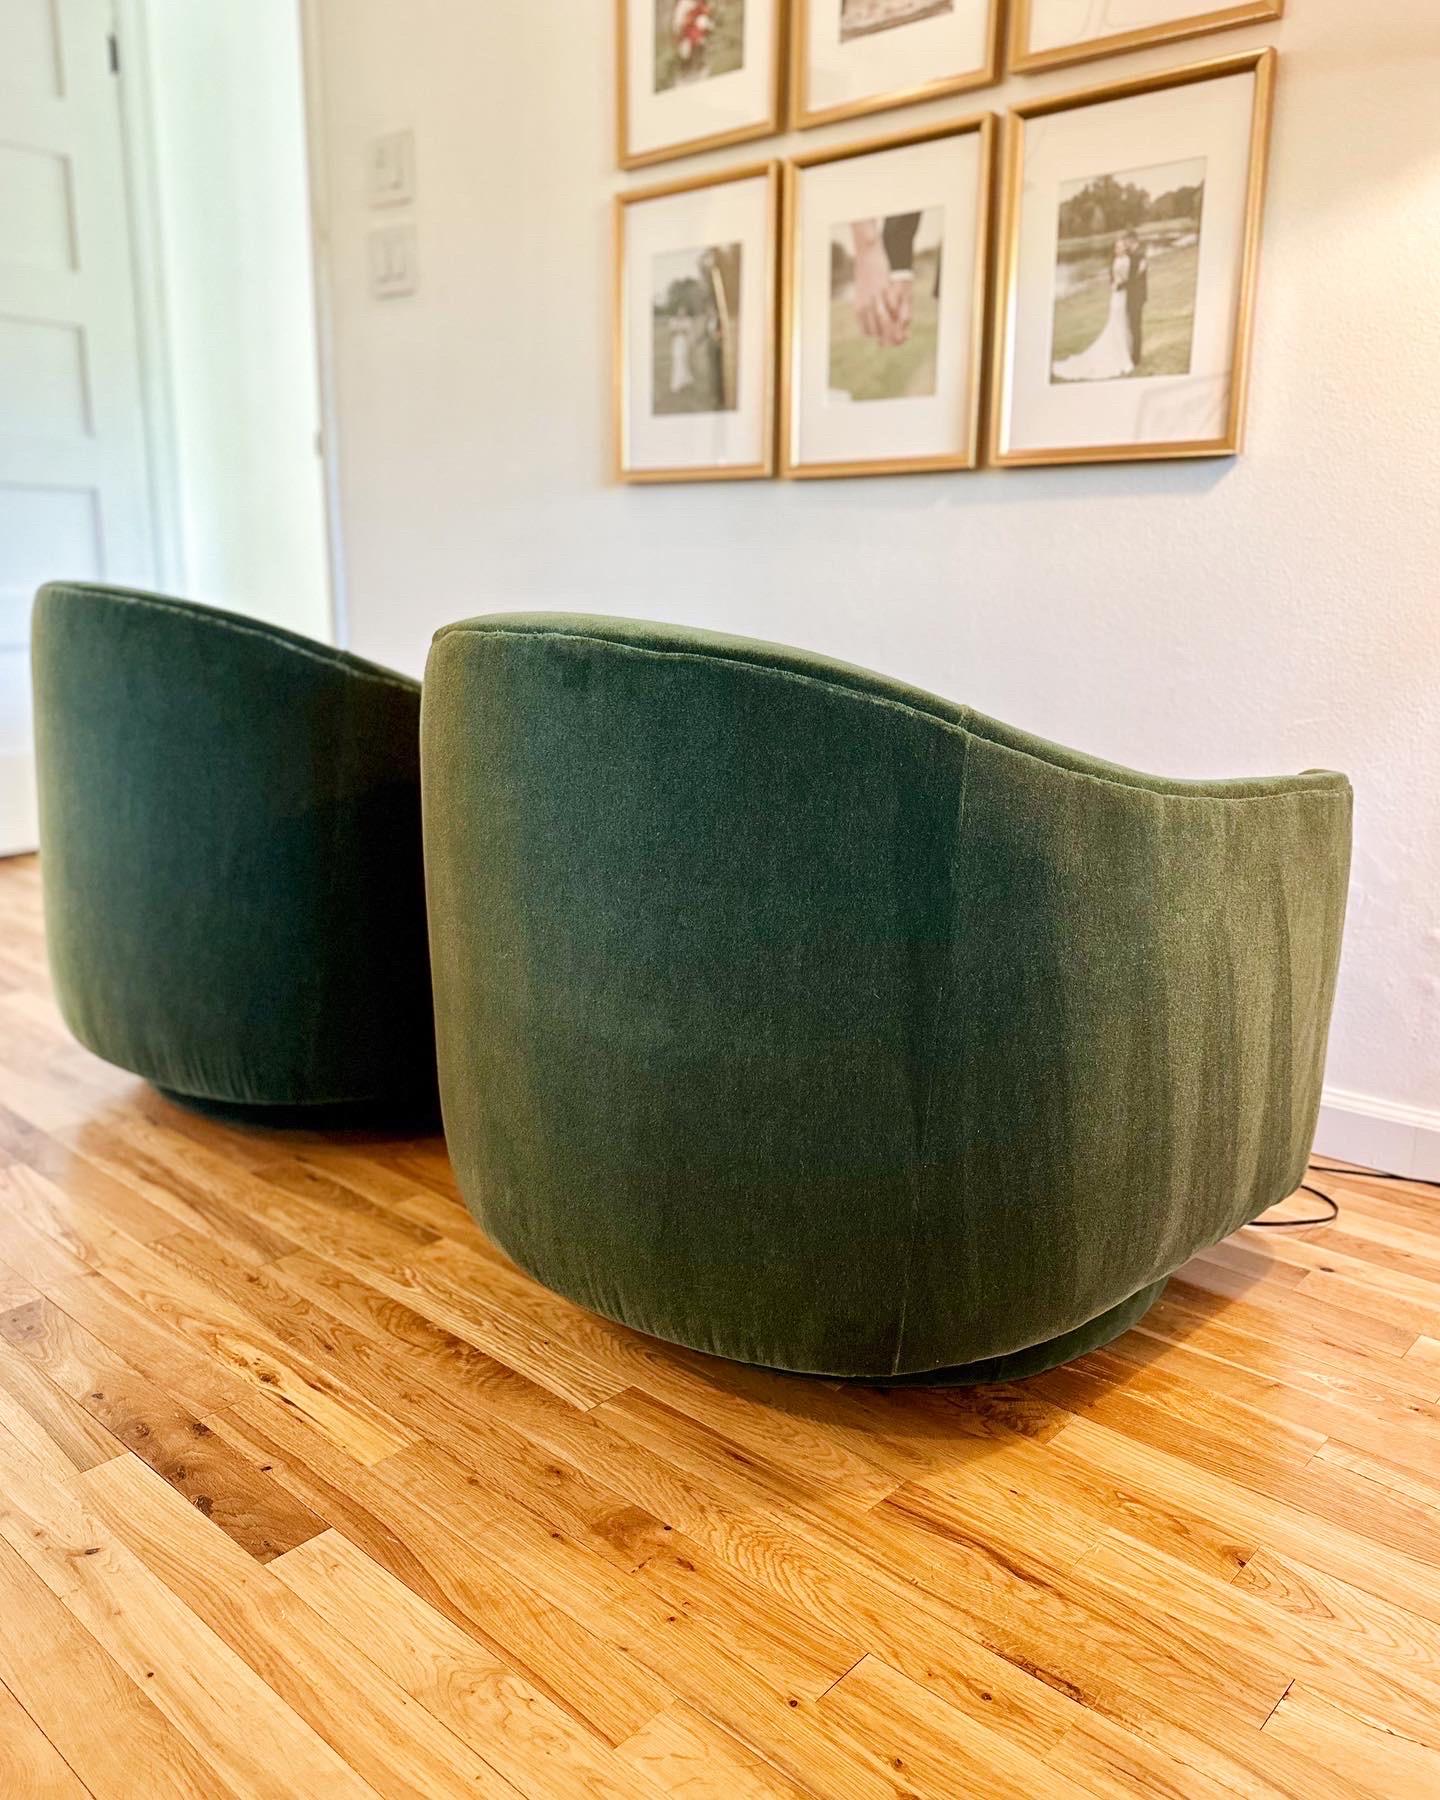 Lush and elegant pair of swivel club chairs by Directional, reupholstered in emerald green mohair, c.1970s. Vibrant yet classic, these beauties will dress up any room. Both chairs swivel and tilt and are in excellent condition with brand new 100%